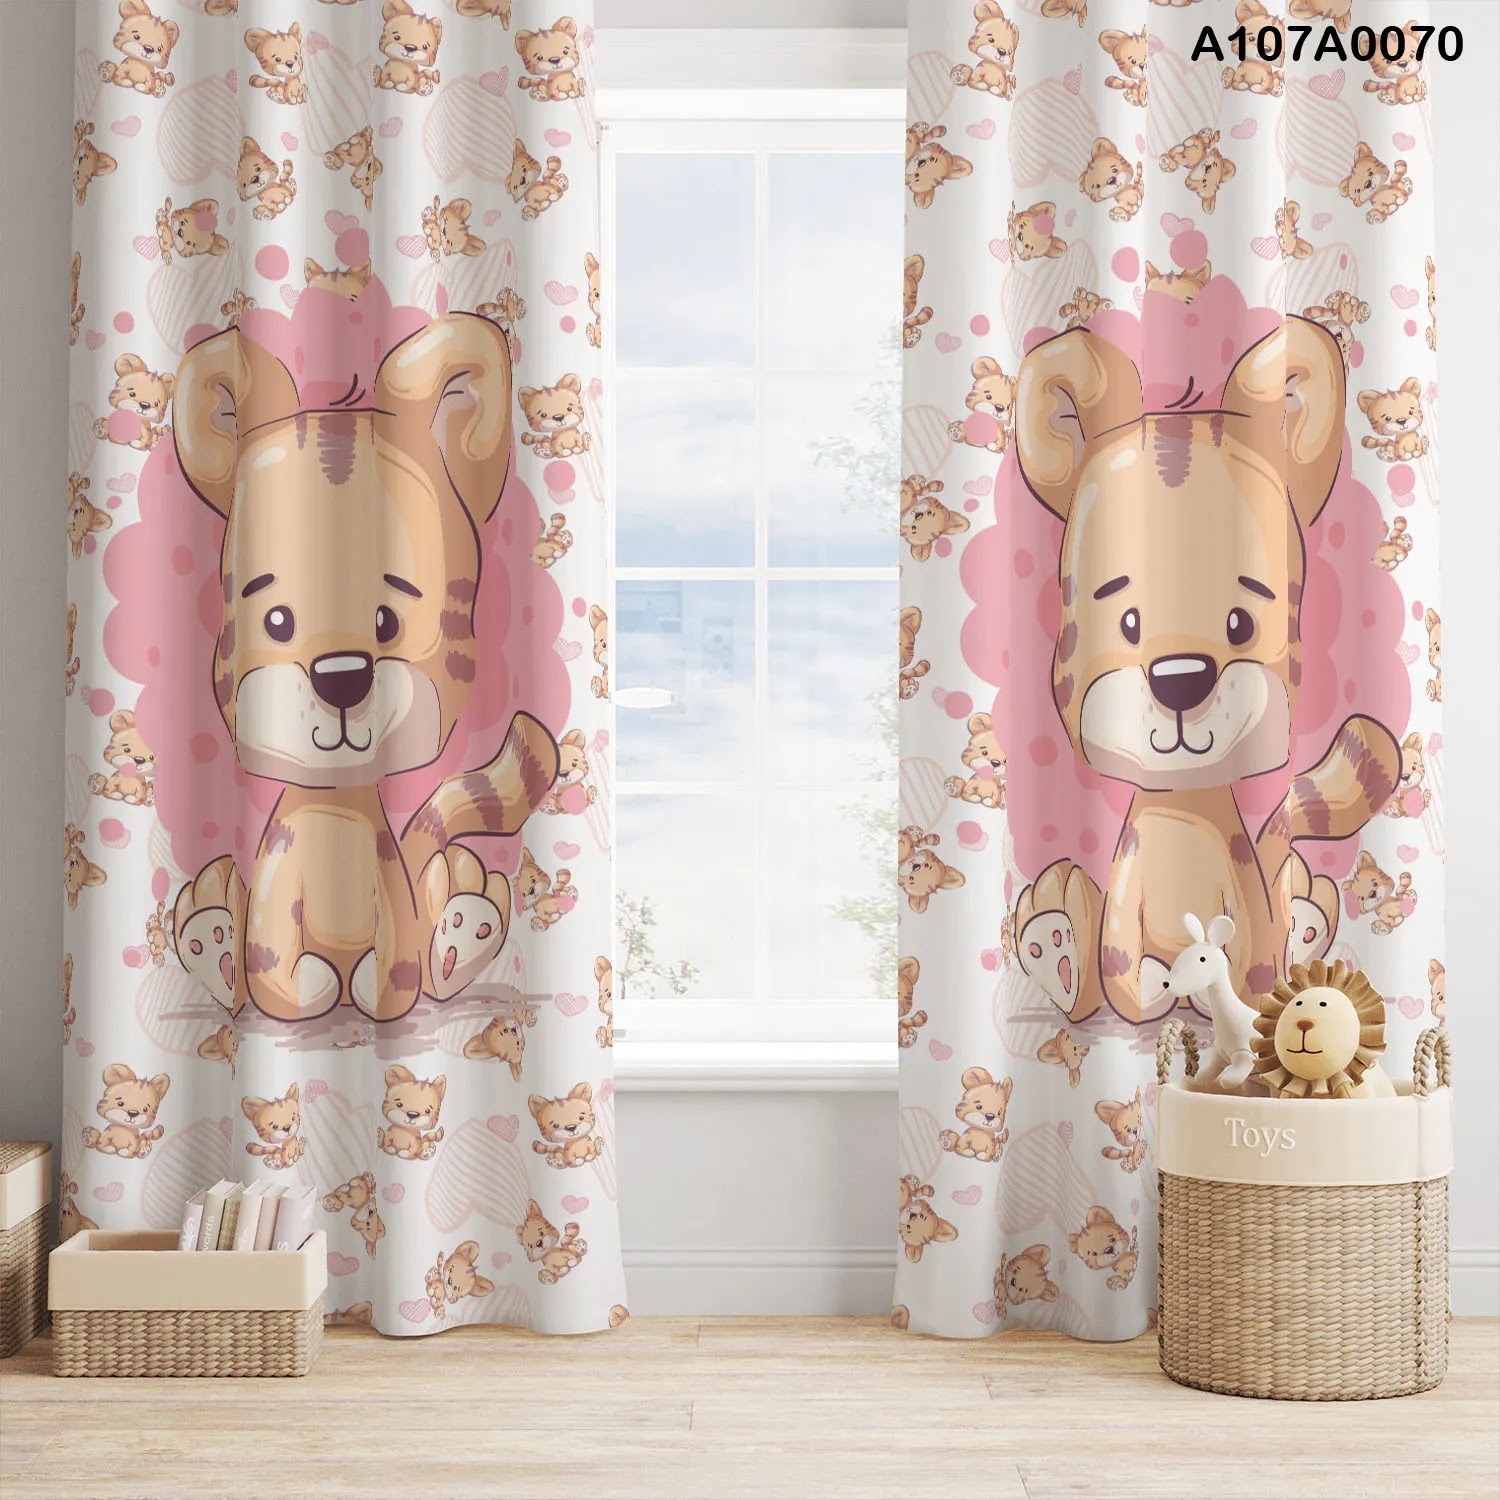 Curtains in pink and white with little tiger for children room